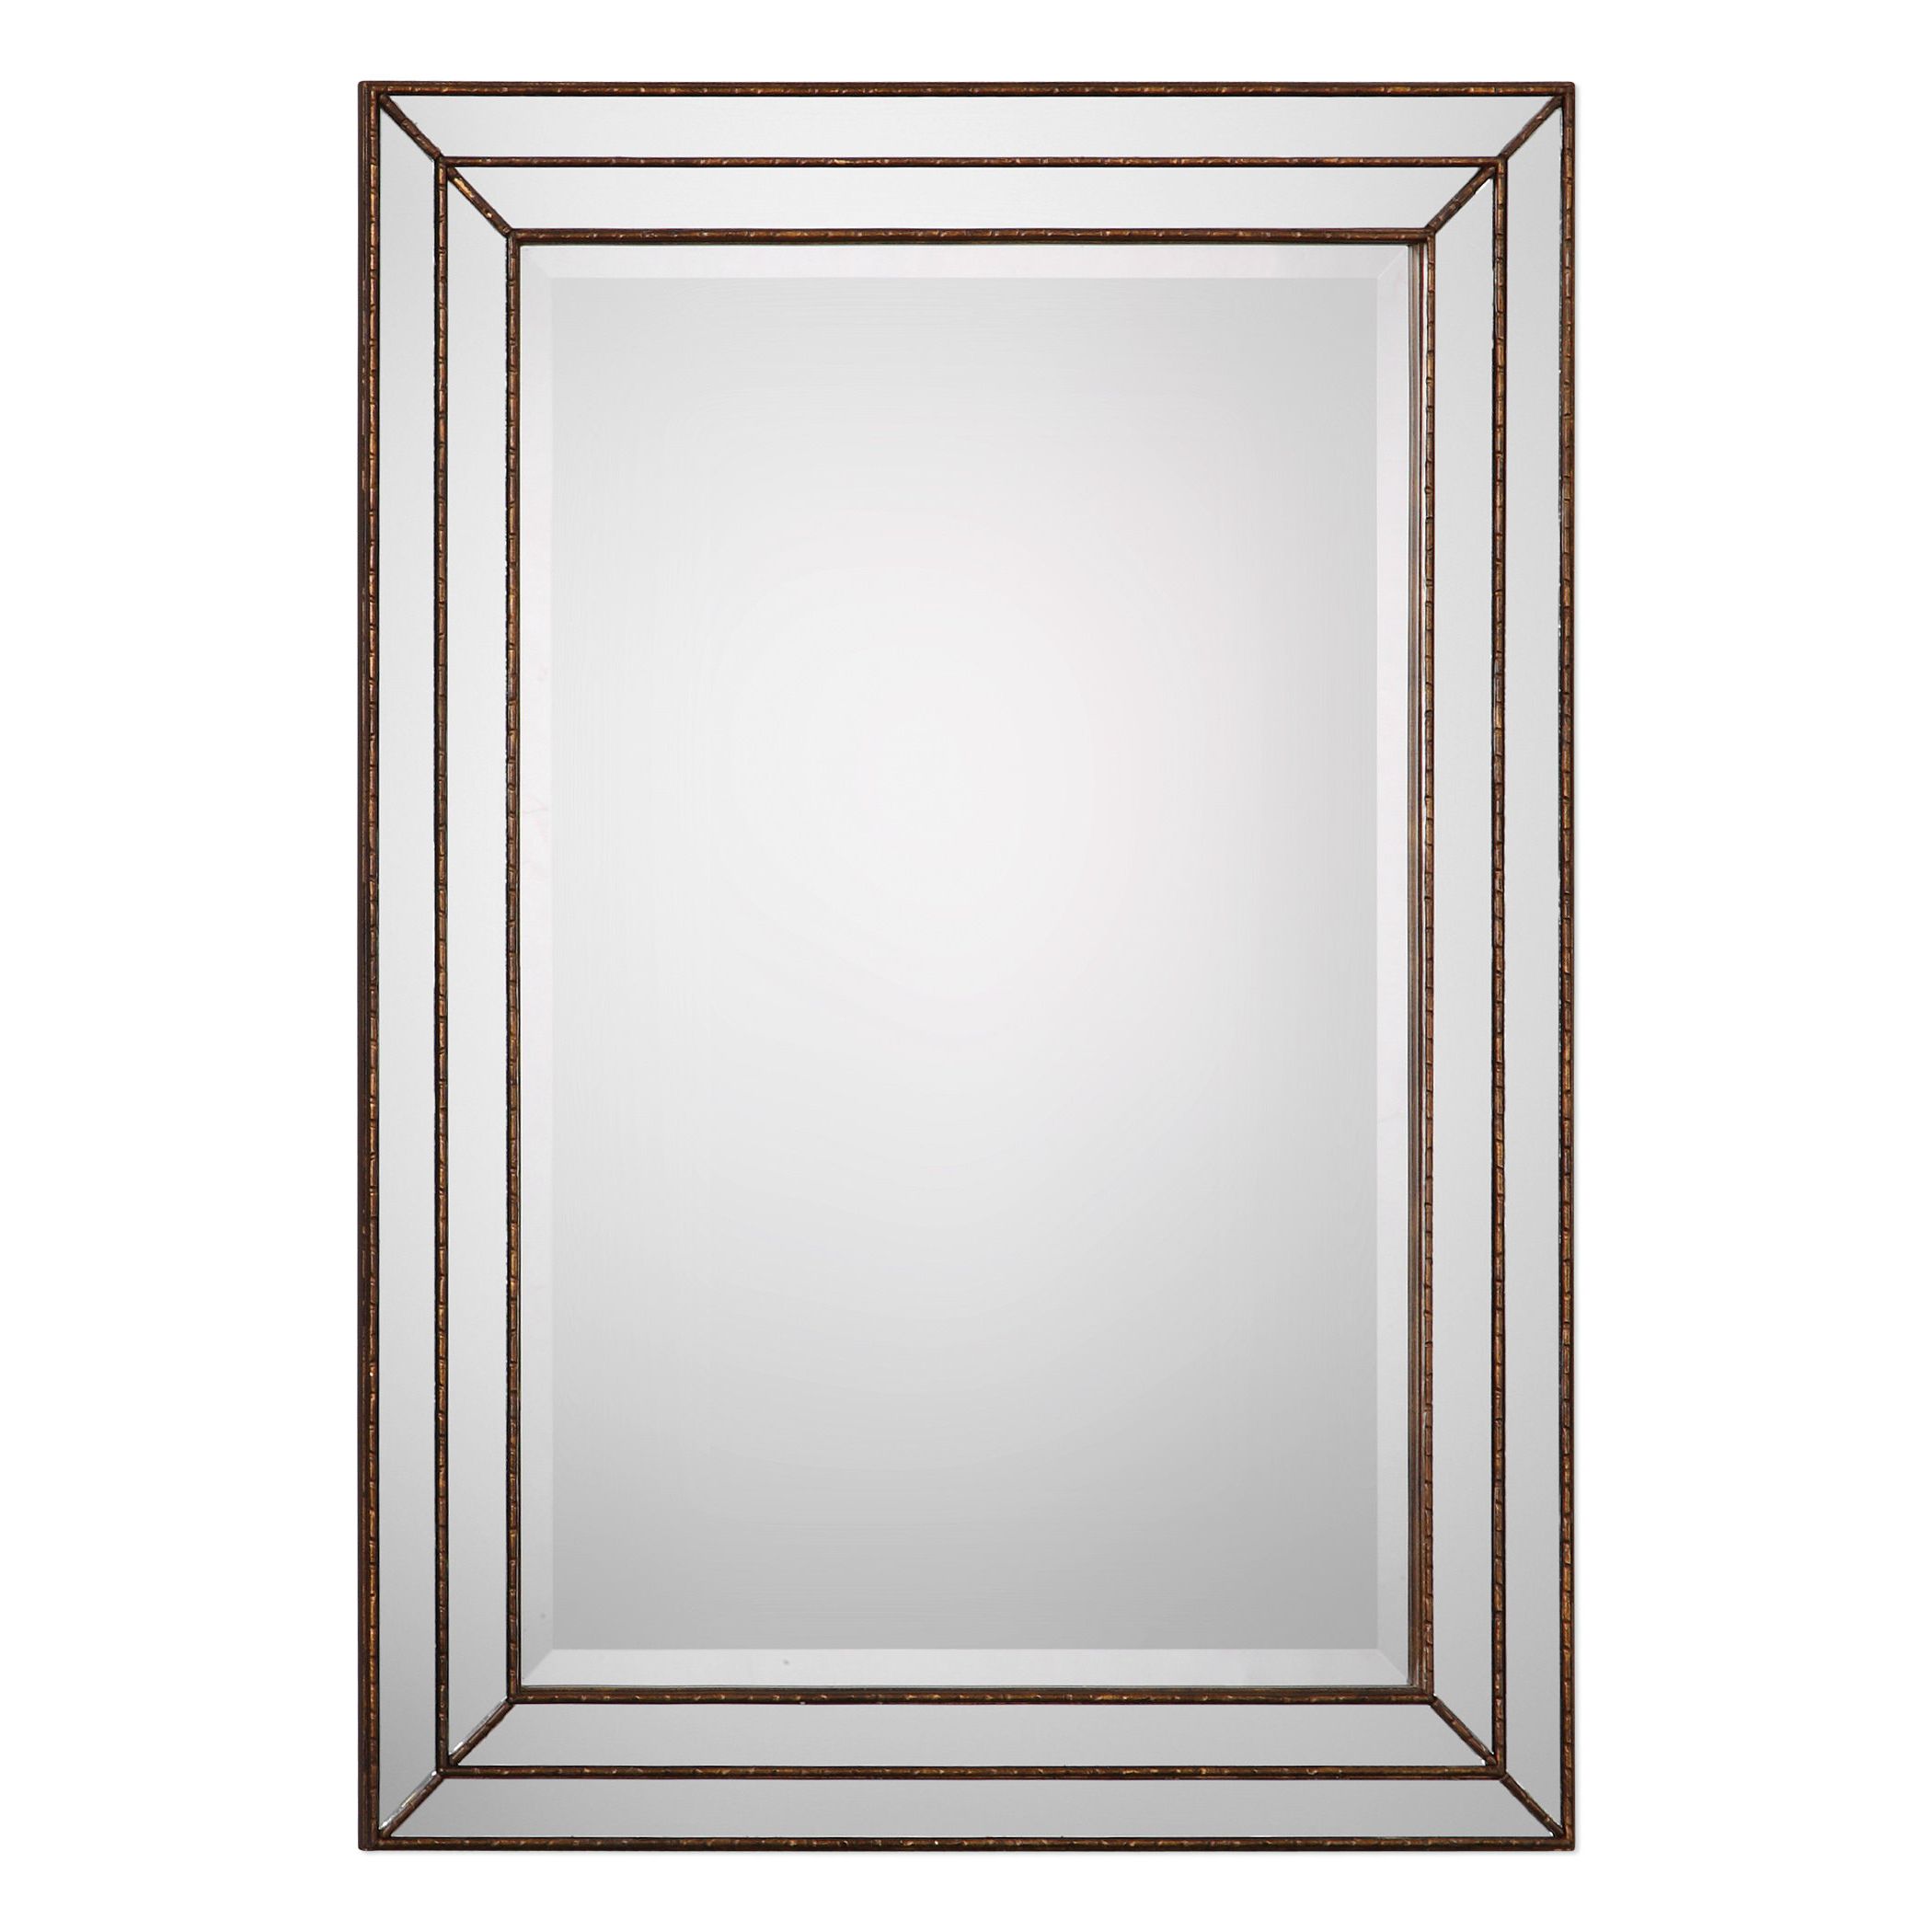 Berinhard Accent Mirrors With Regard To Preferred Greyleigh Willacoochee Traditional Beveled Accent Mirror (View 19 of 20)